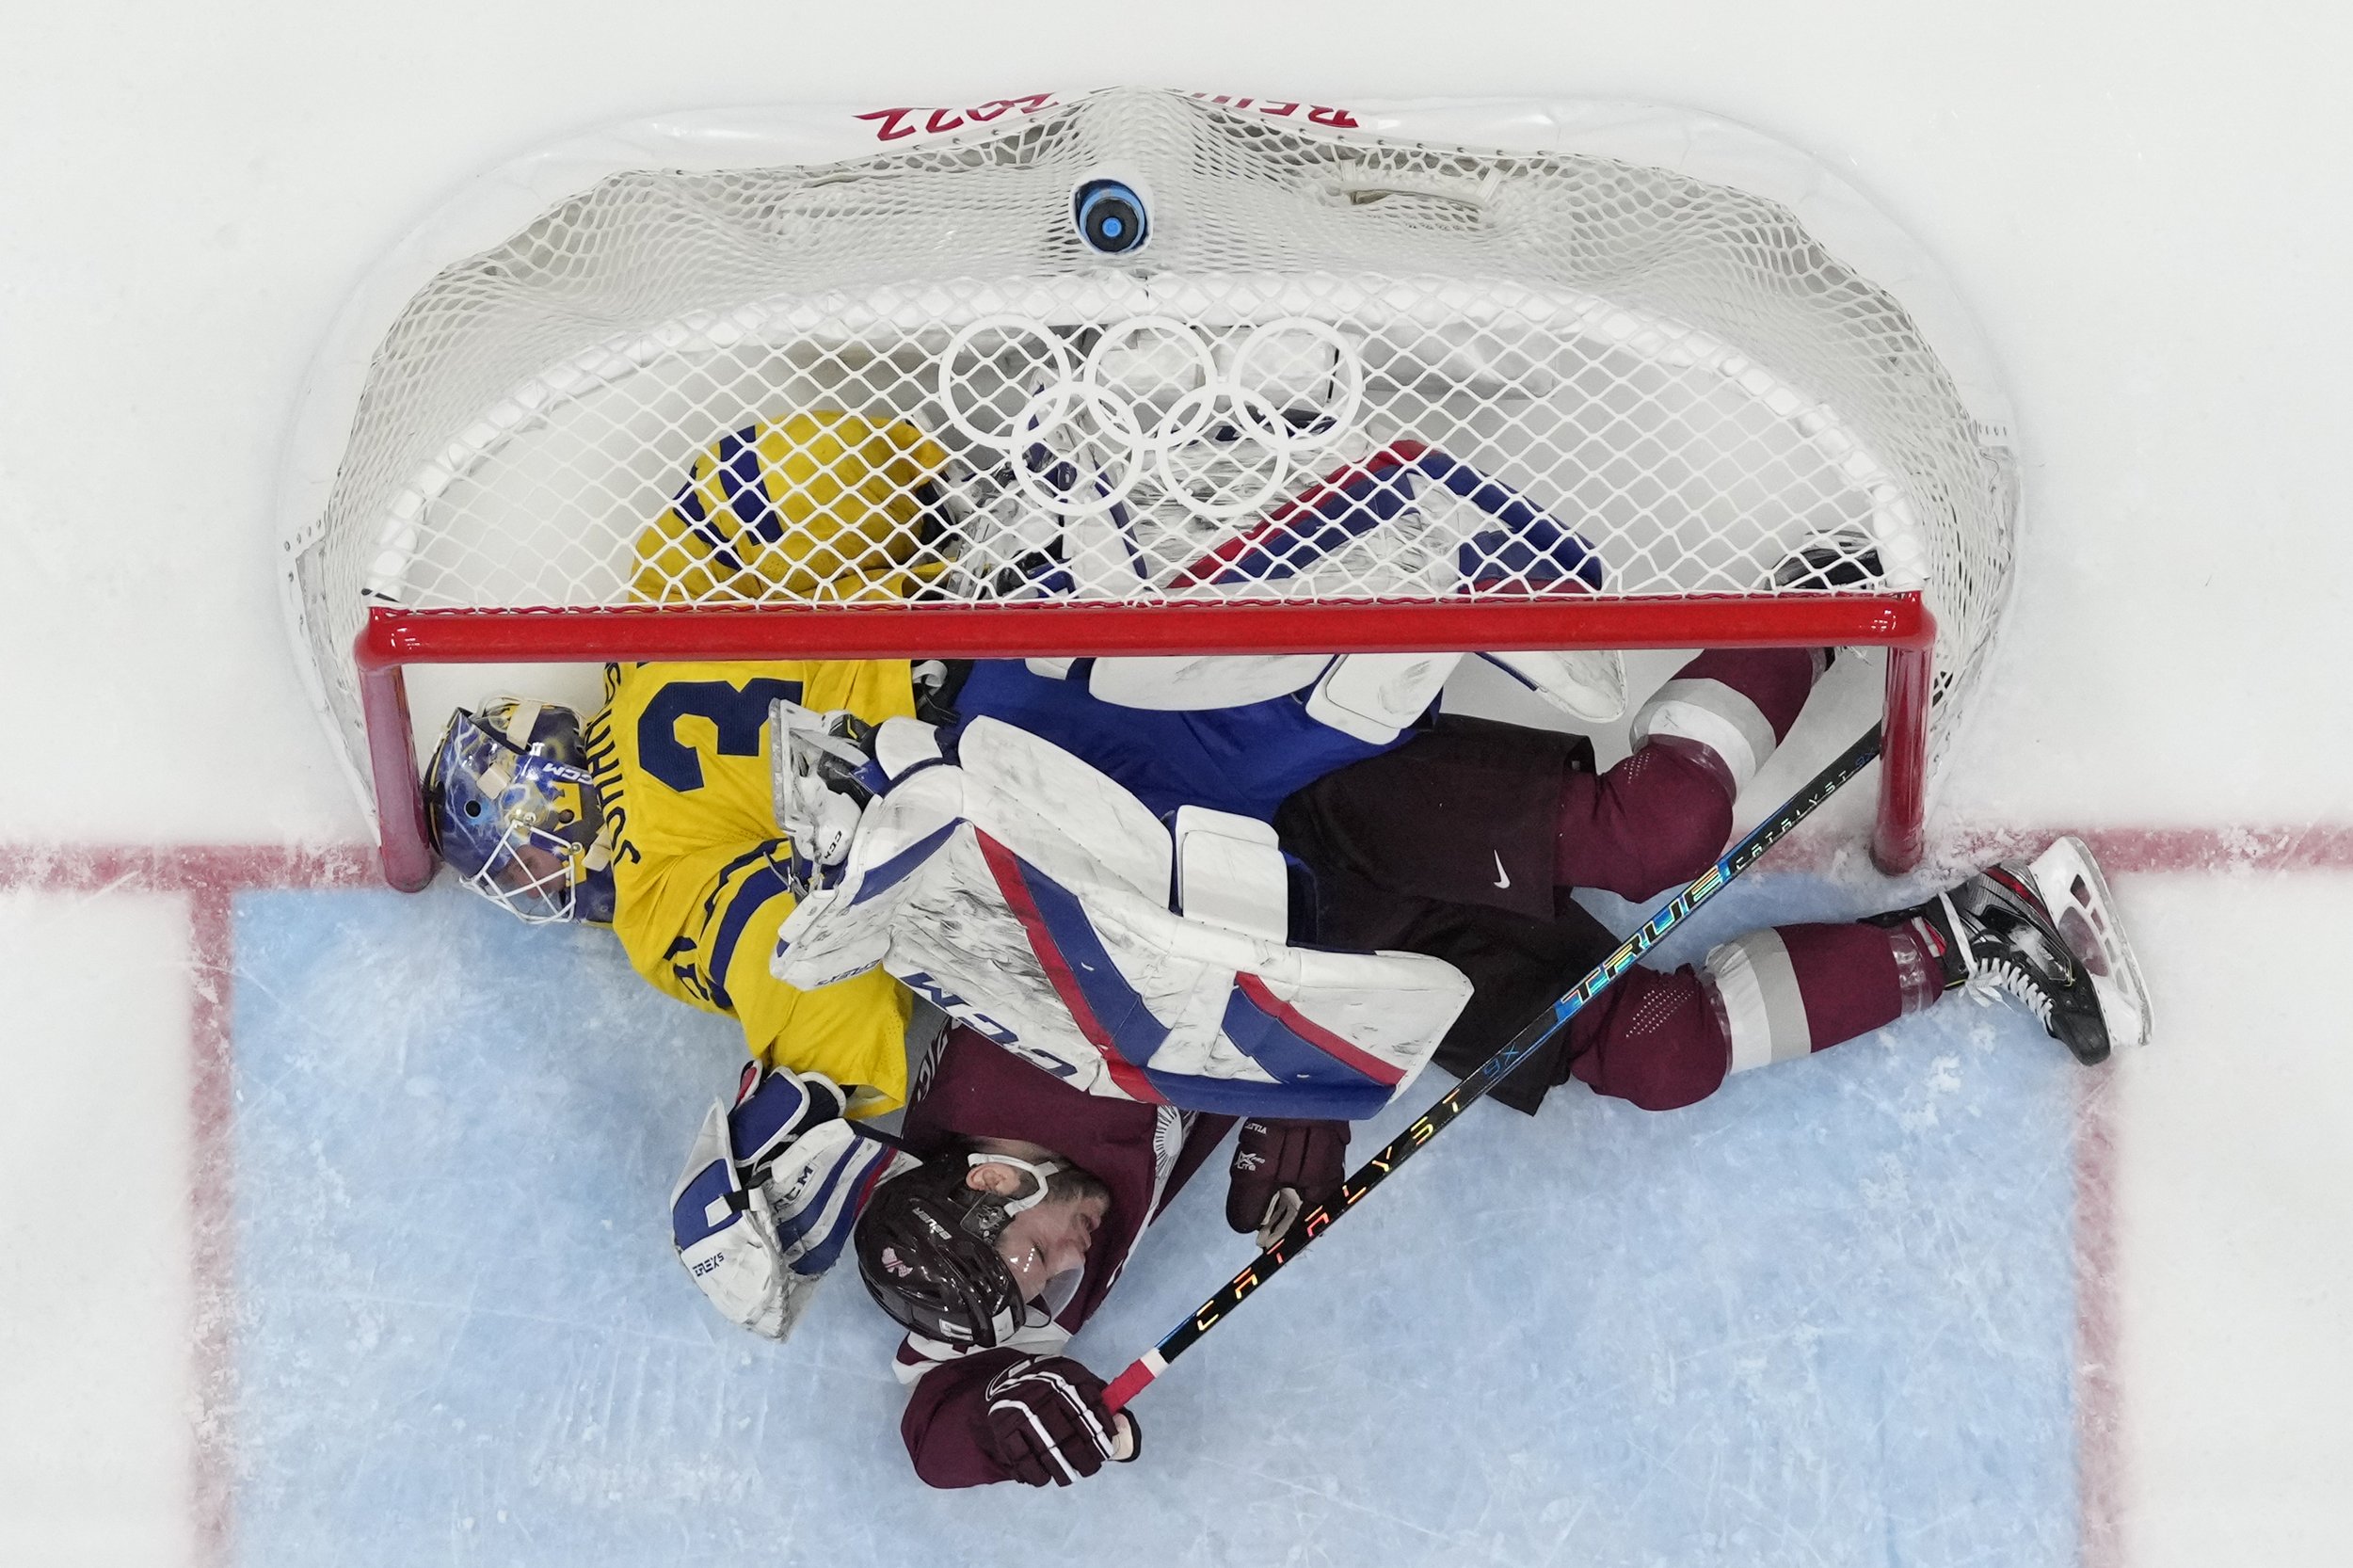  Latvia's Martins Dzierkals, bottom, winds up under Sweden goalkeeper Lars Johansson (31) after they collided during a preliminary round men's hockey game at the 2022 Winter Olympics, Thursday, Feb. 10, 2022, in Beijing. (AP Photo/Matt Slocum) 